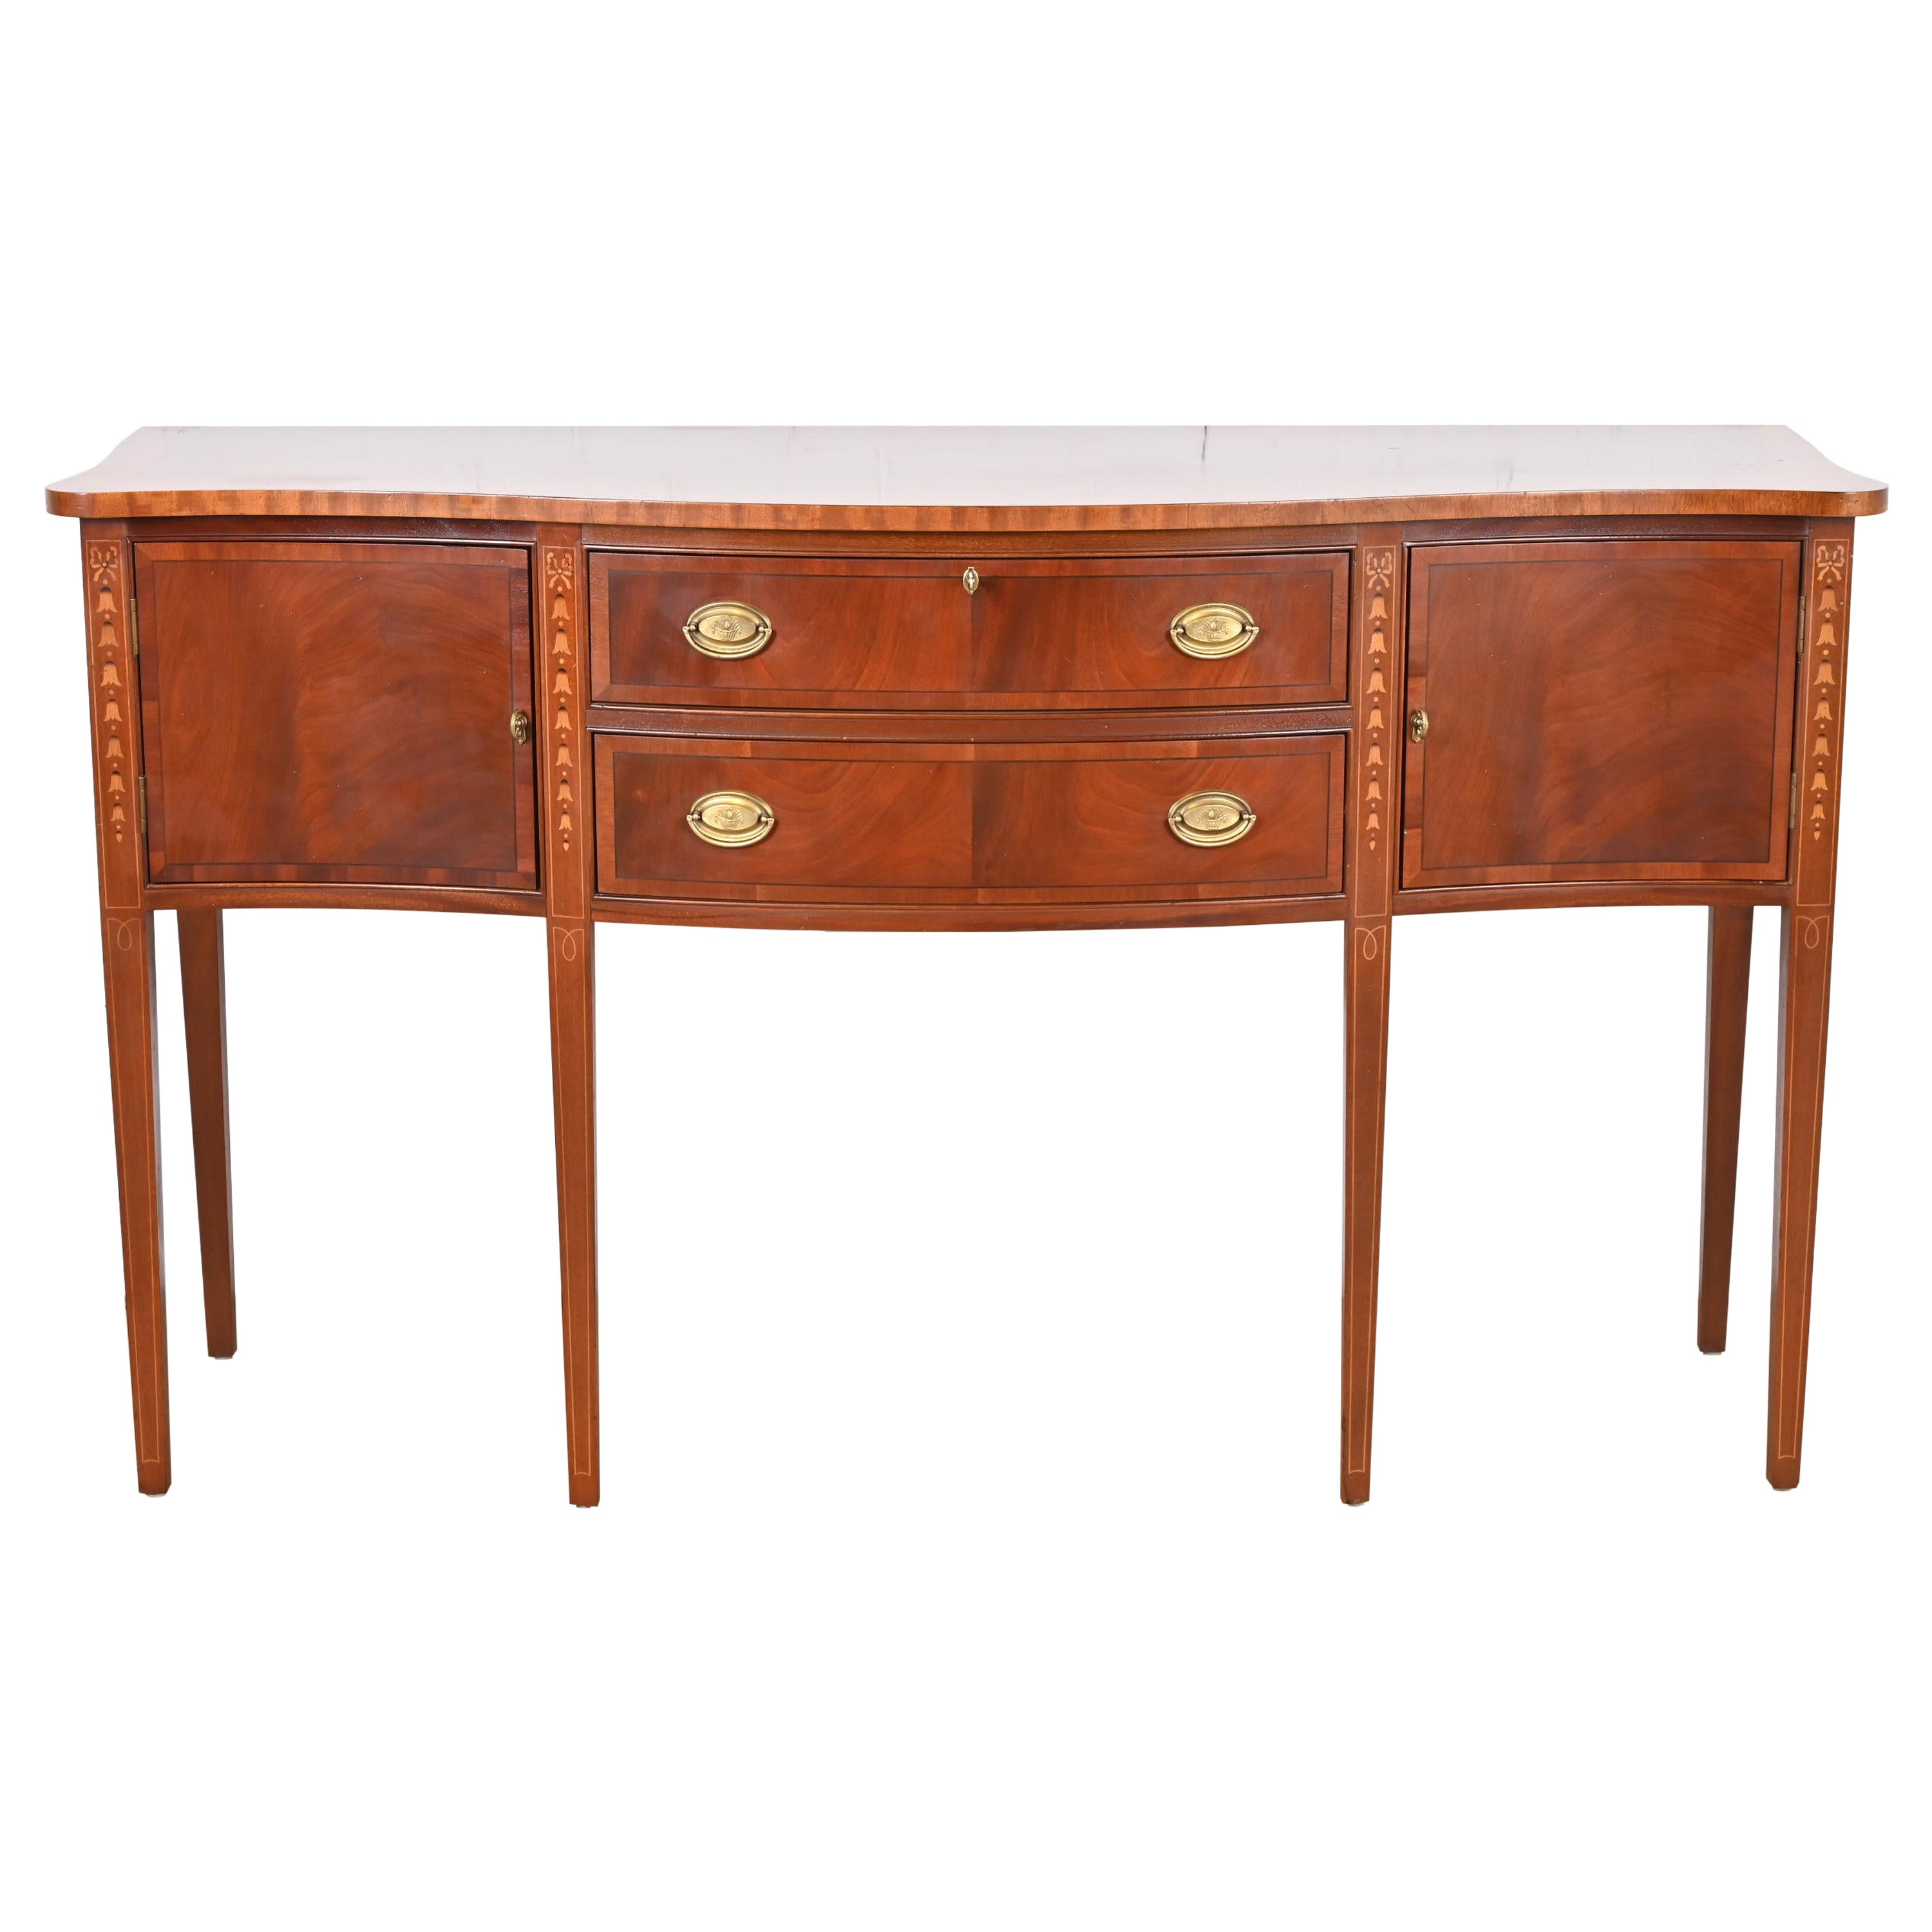 Hepplewhite Inlaid Mahogany Serpentine Front Sideboard Buffet or Credenza